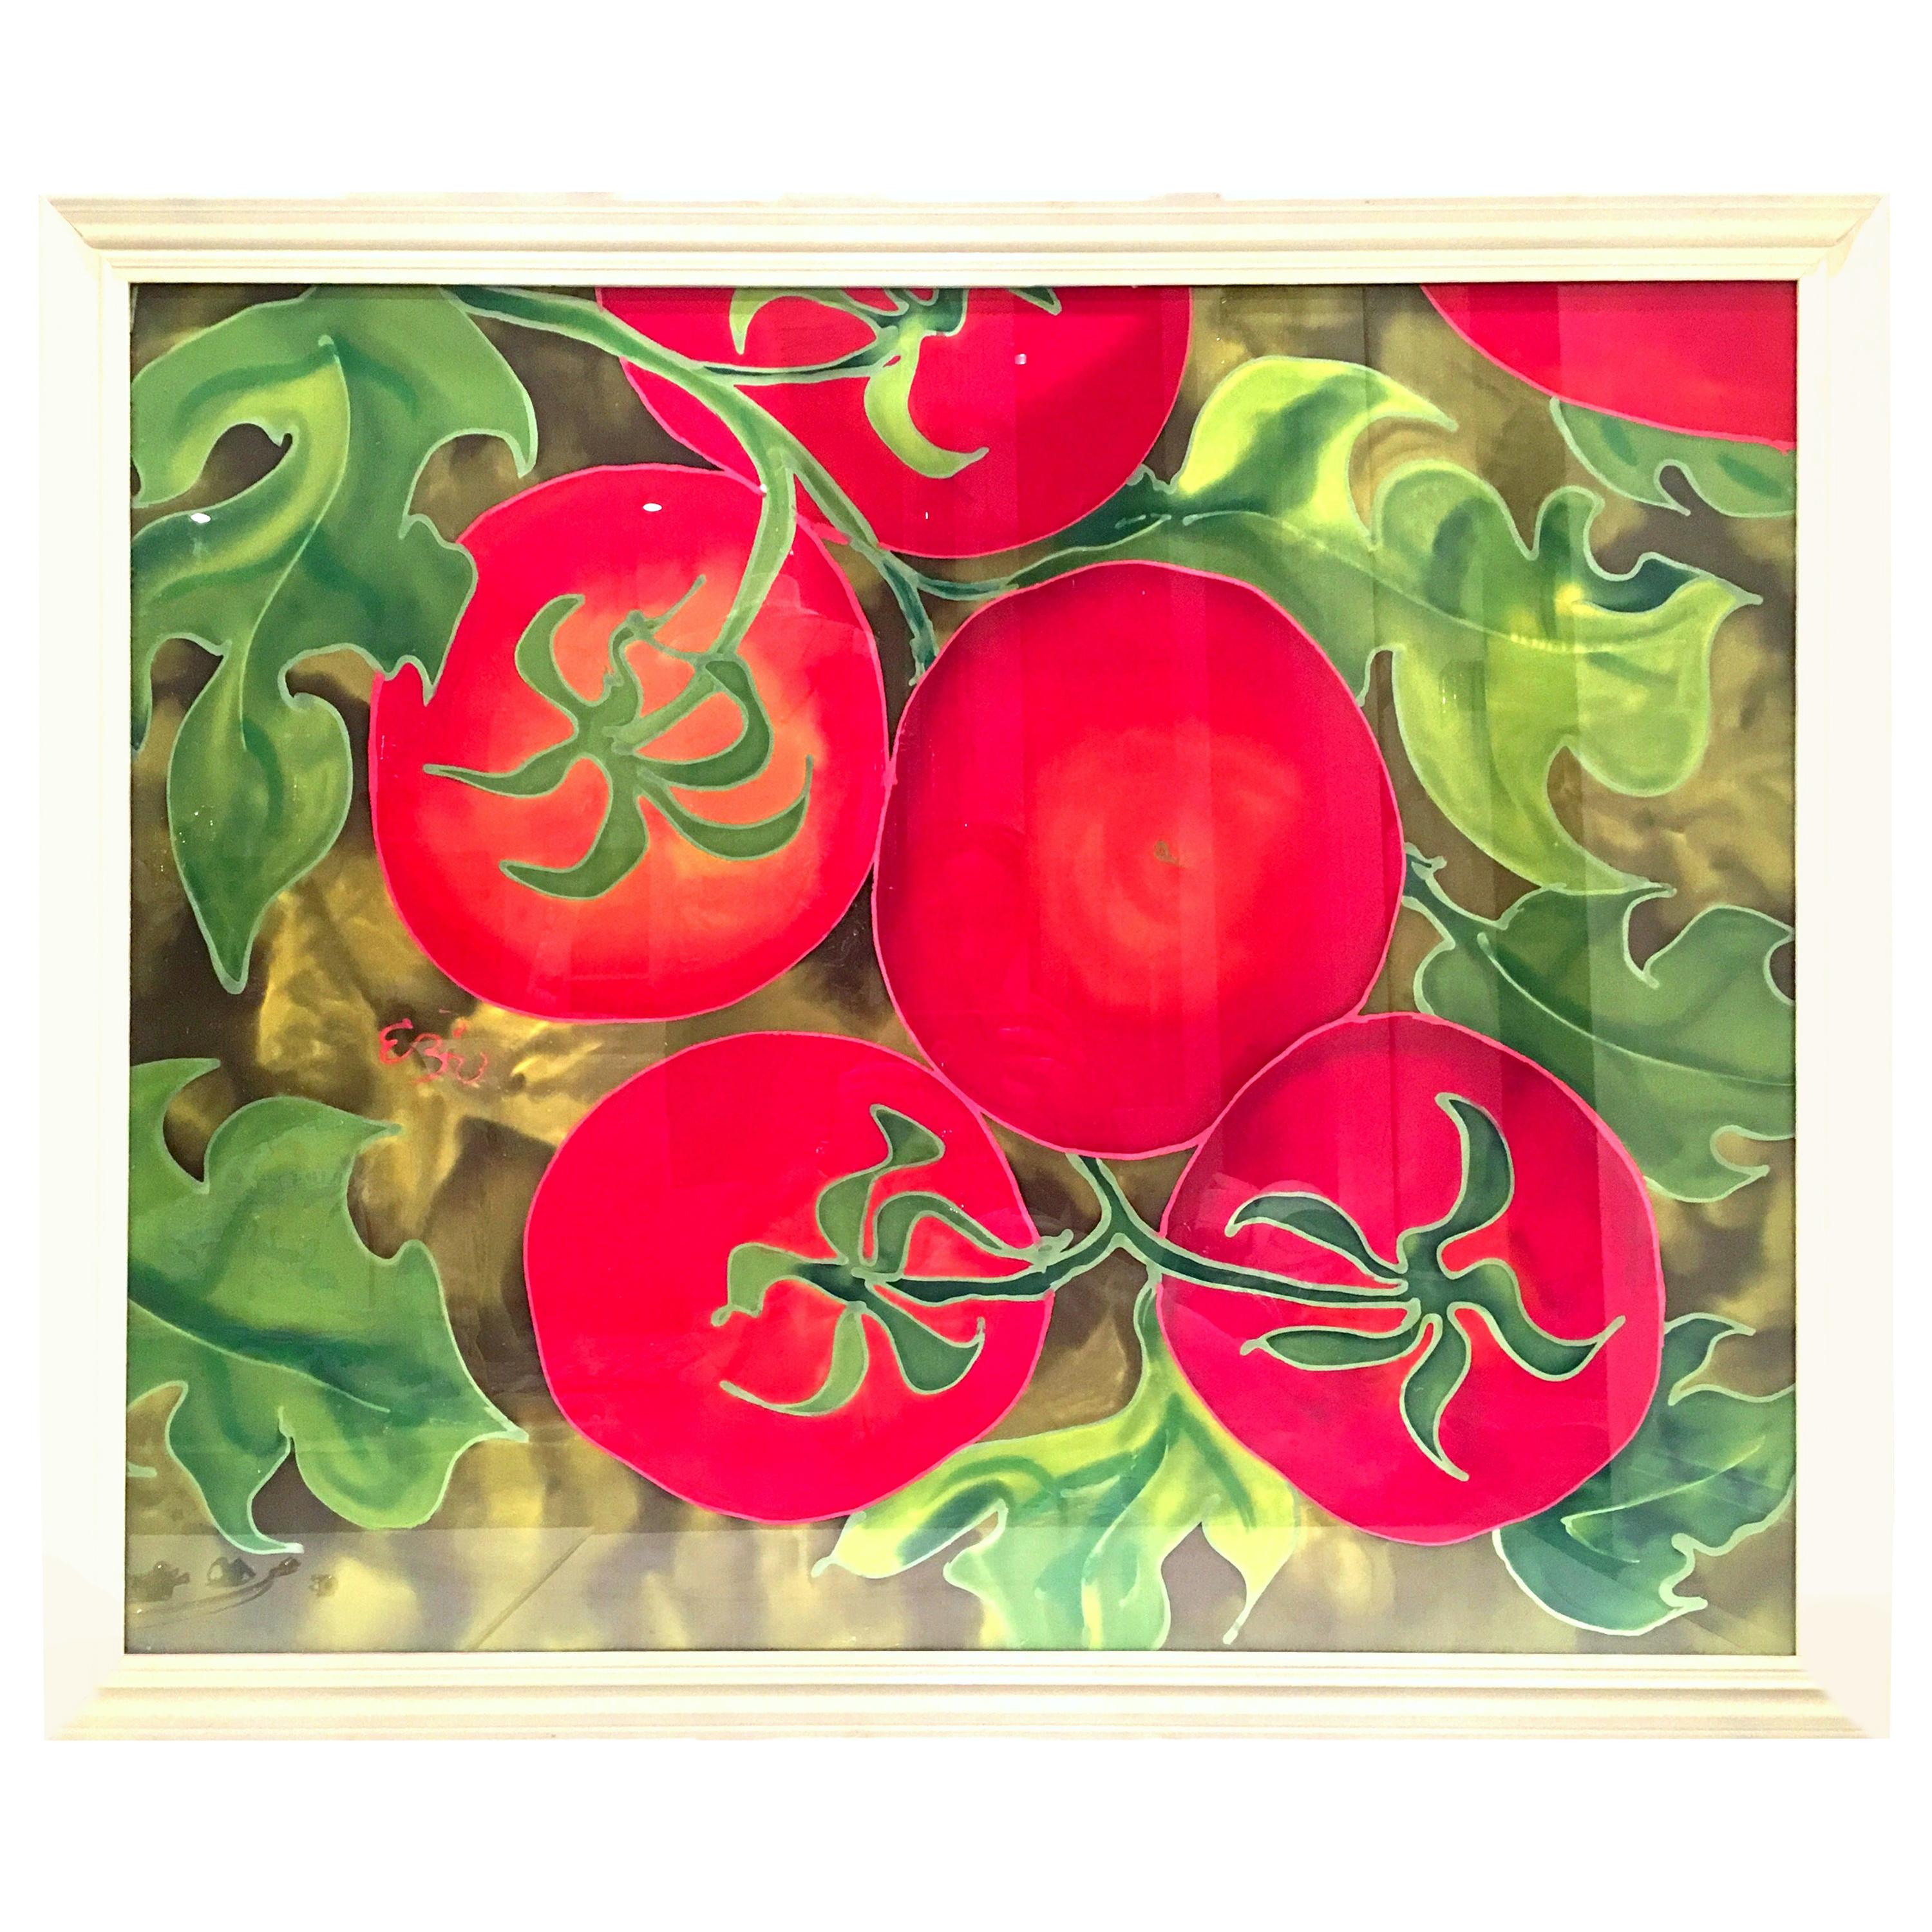 1990s Original Mixed-Media Painting "Tomatoes" by, Elizabeth E. Mitchell-Signed For Sale